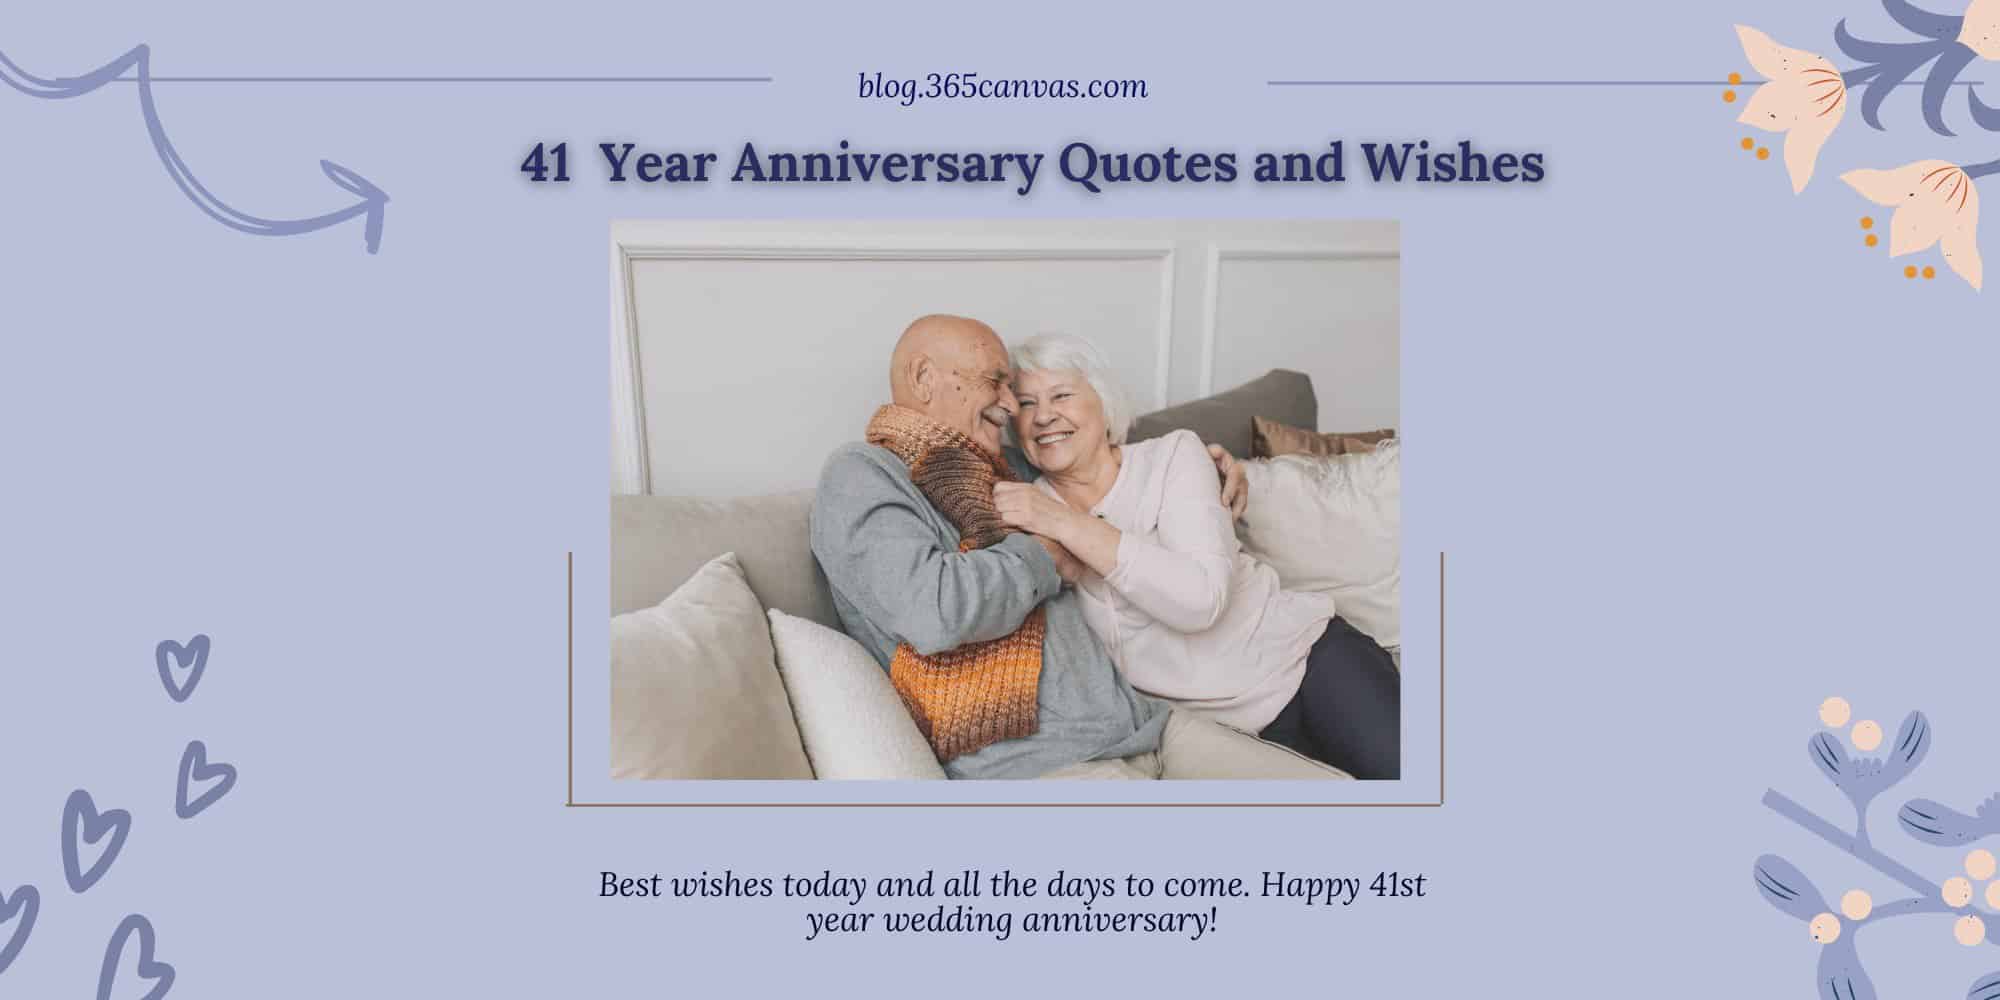 30+ Best 41st Year Office Anniversary Quotes, Wishes, Messages with Image